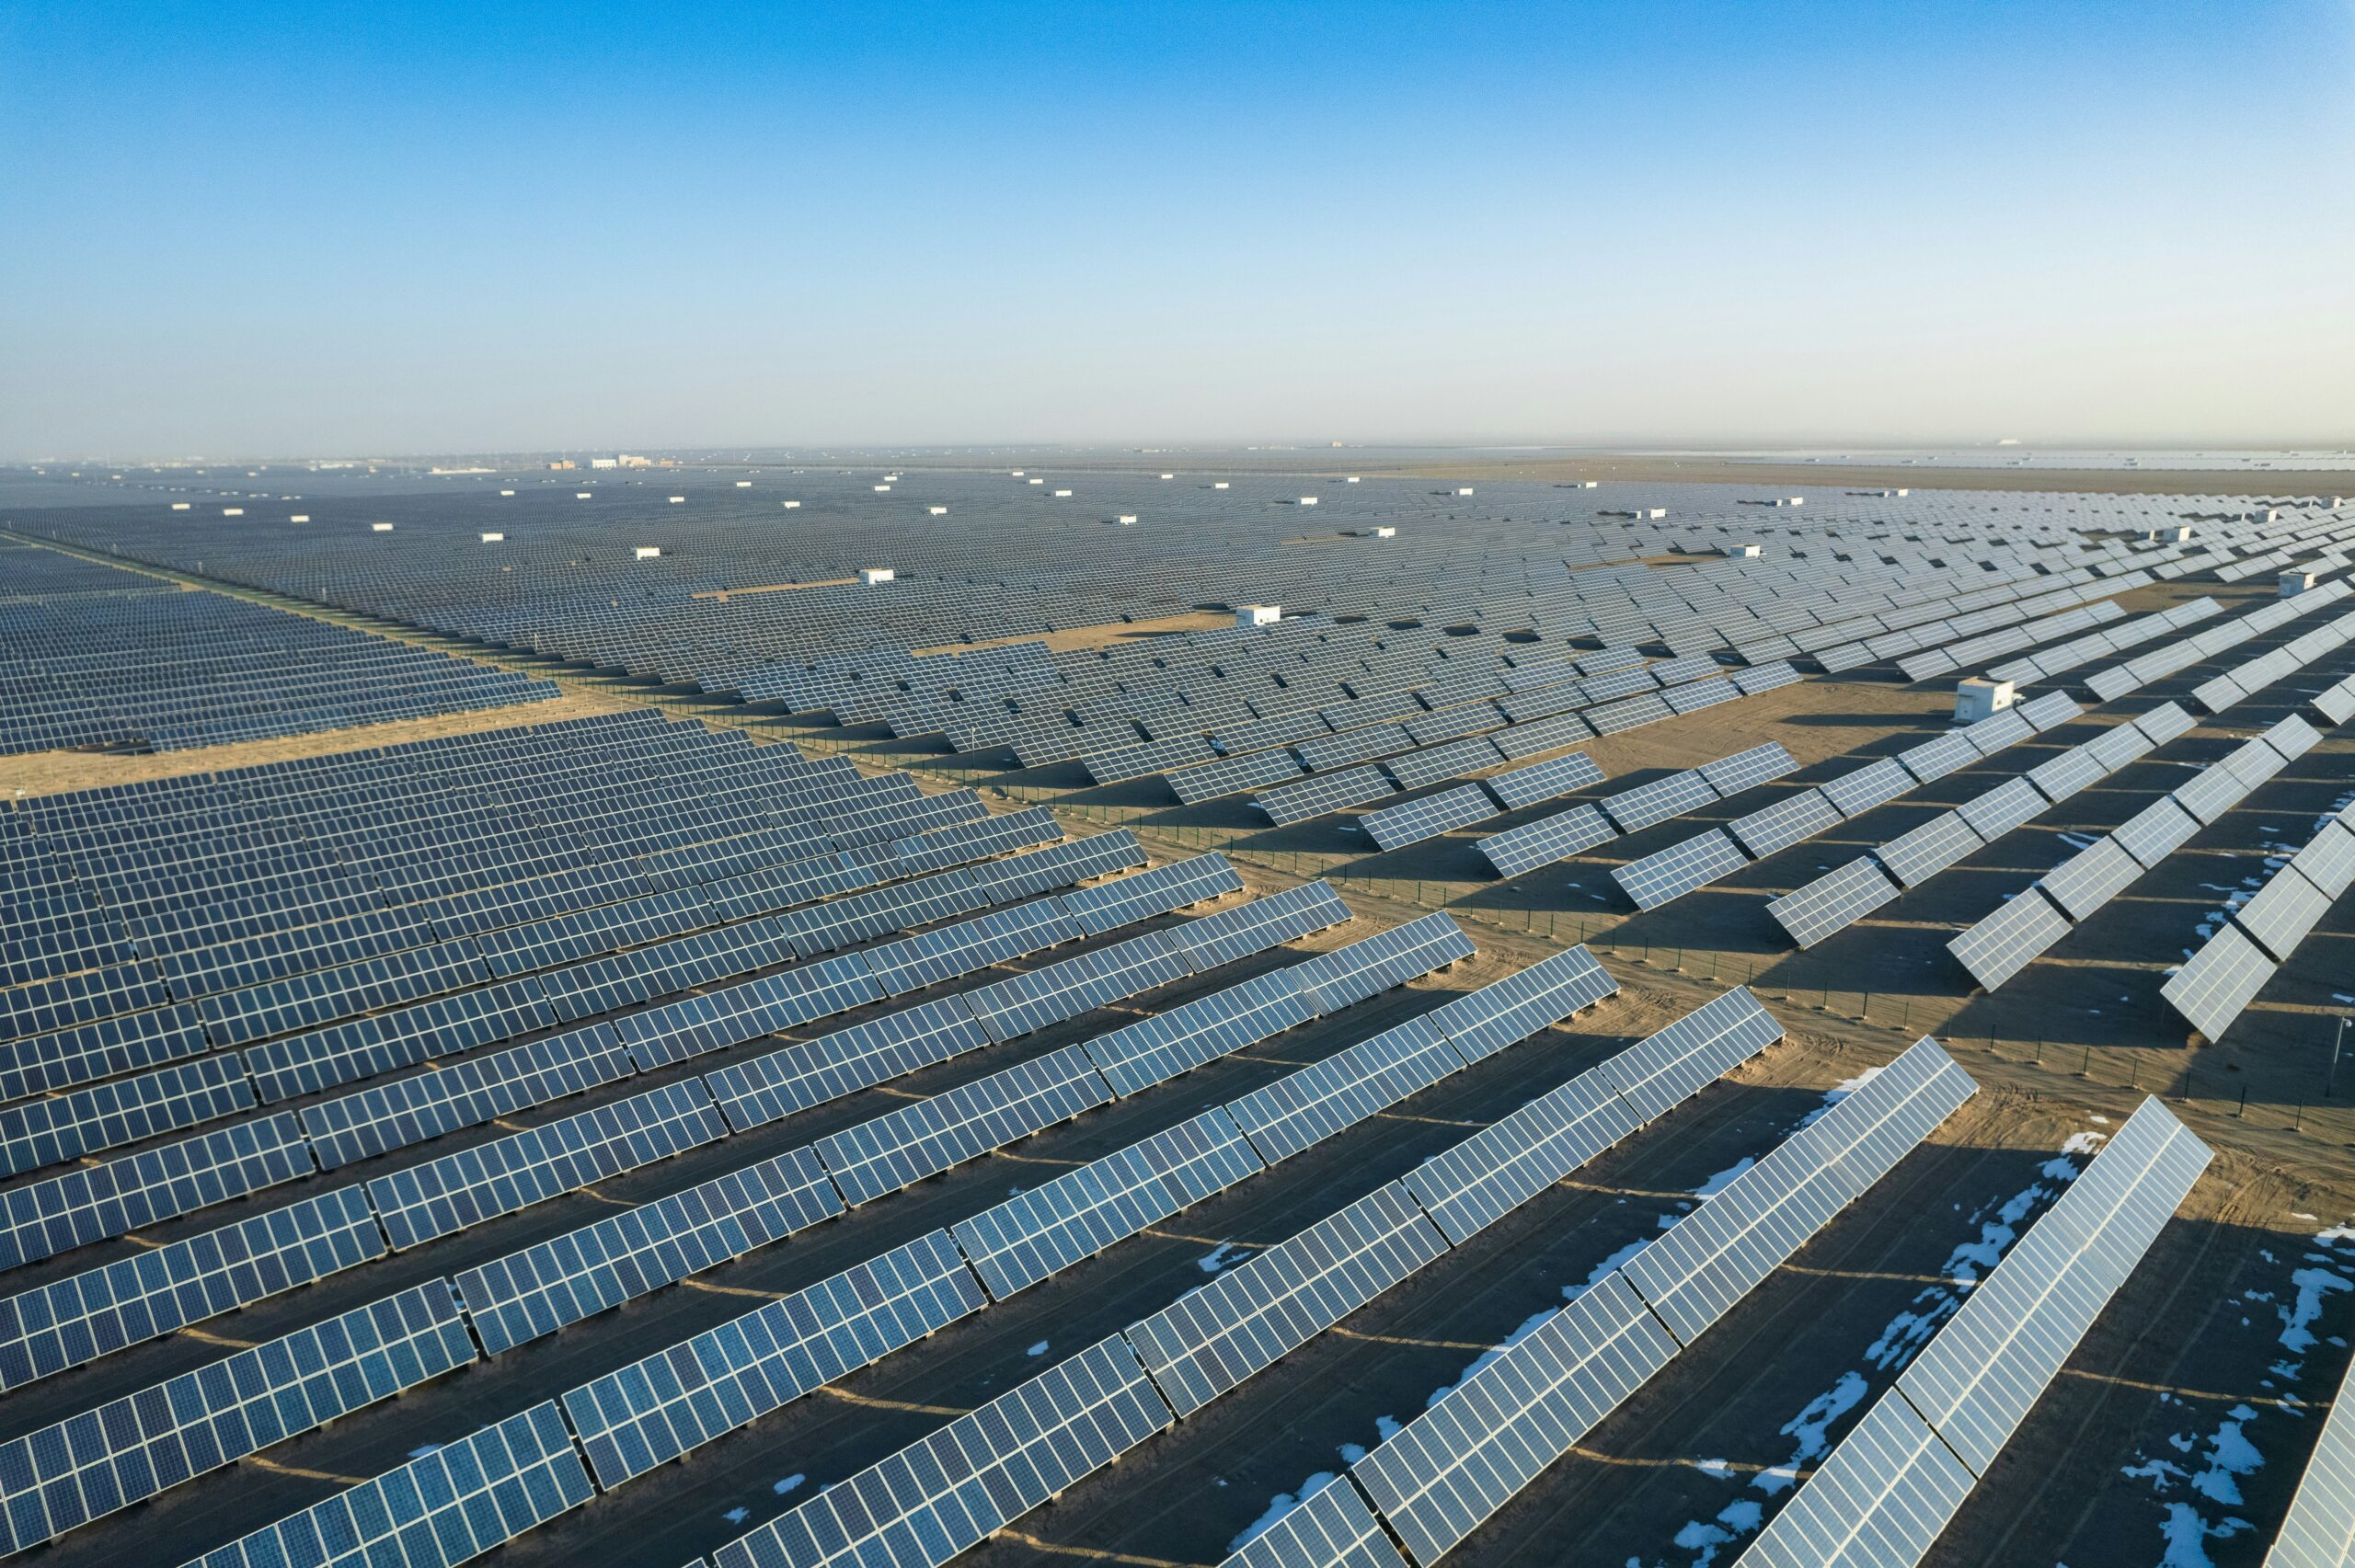 A solar power plant in Dunhuang, China.